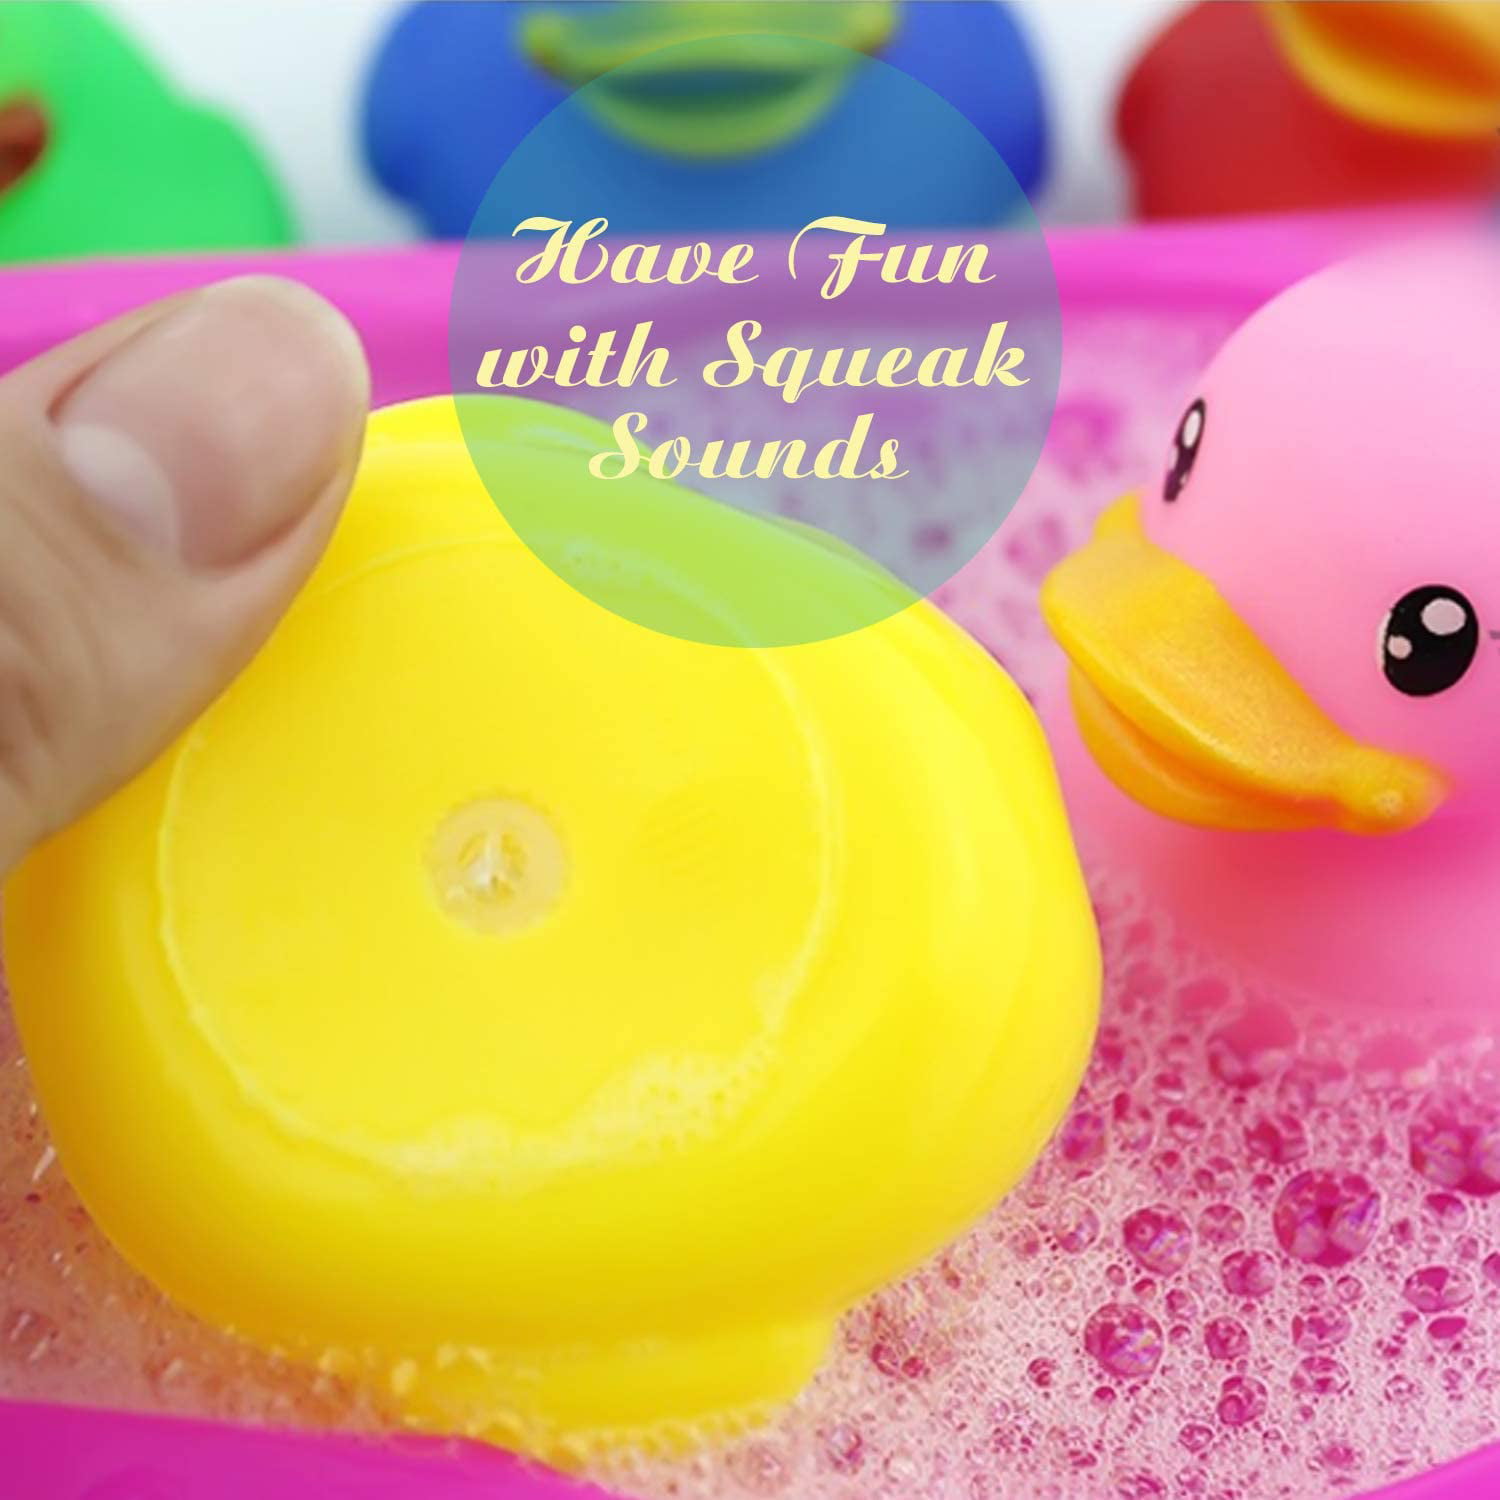 12 Pcs Colorful Baby Children Bath Toys Cute Rubber Squeaky Duck Ducky  OuB nb